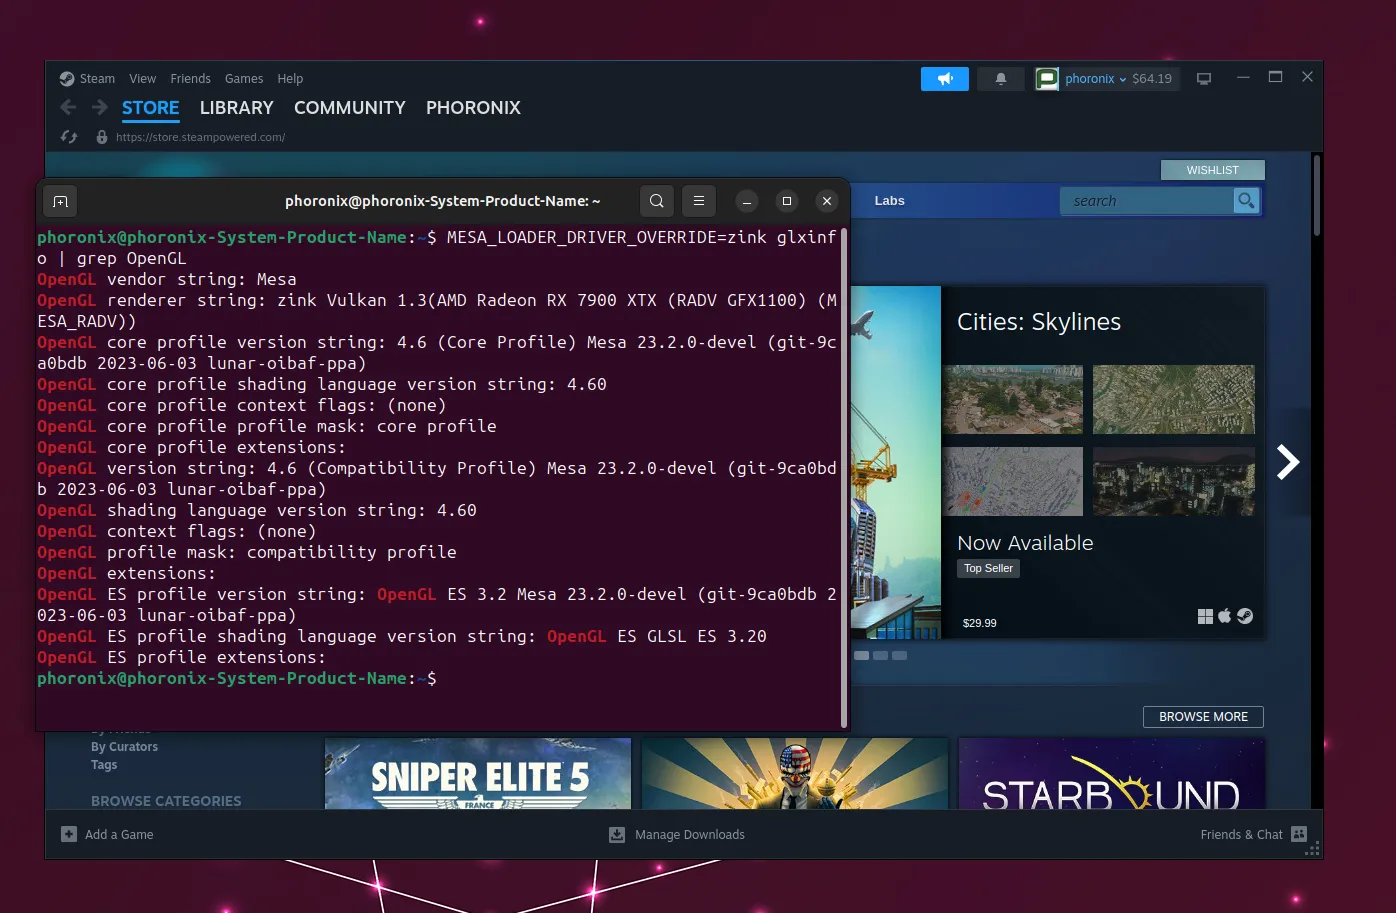 Steam client update brings in-game Notes app, redesigned overlay and more -  gHacks Tech News